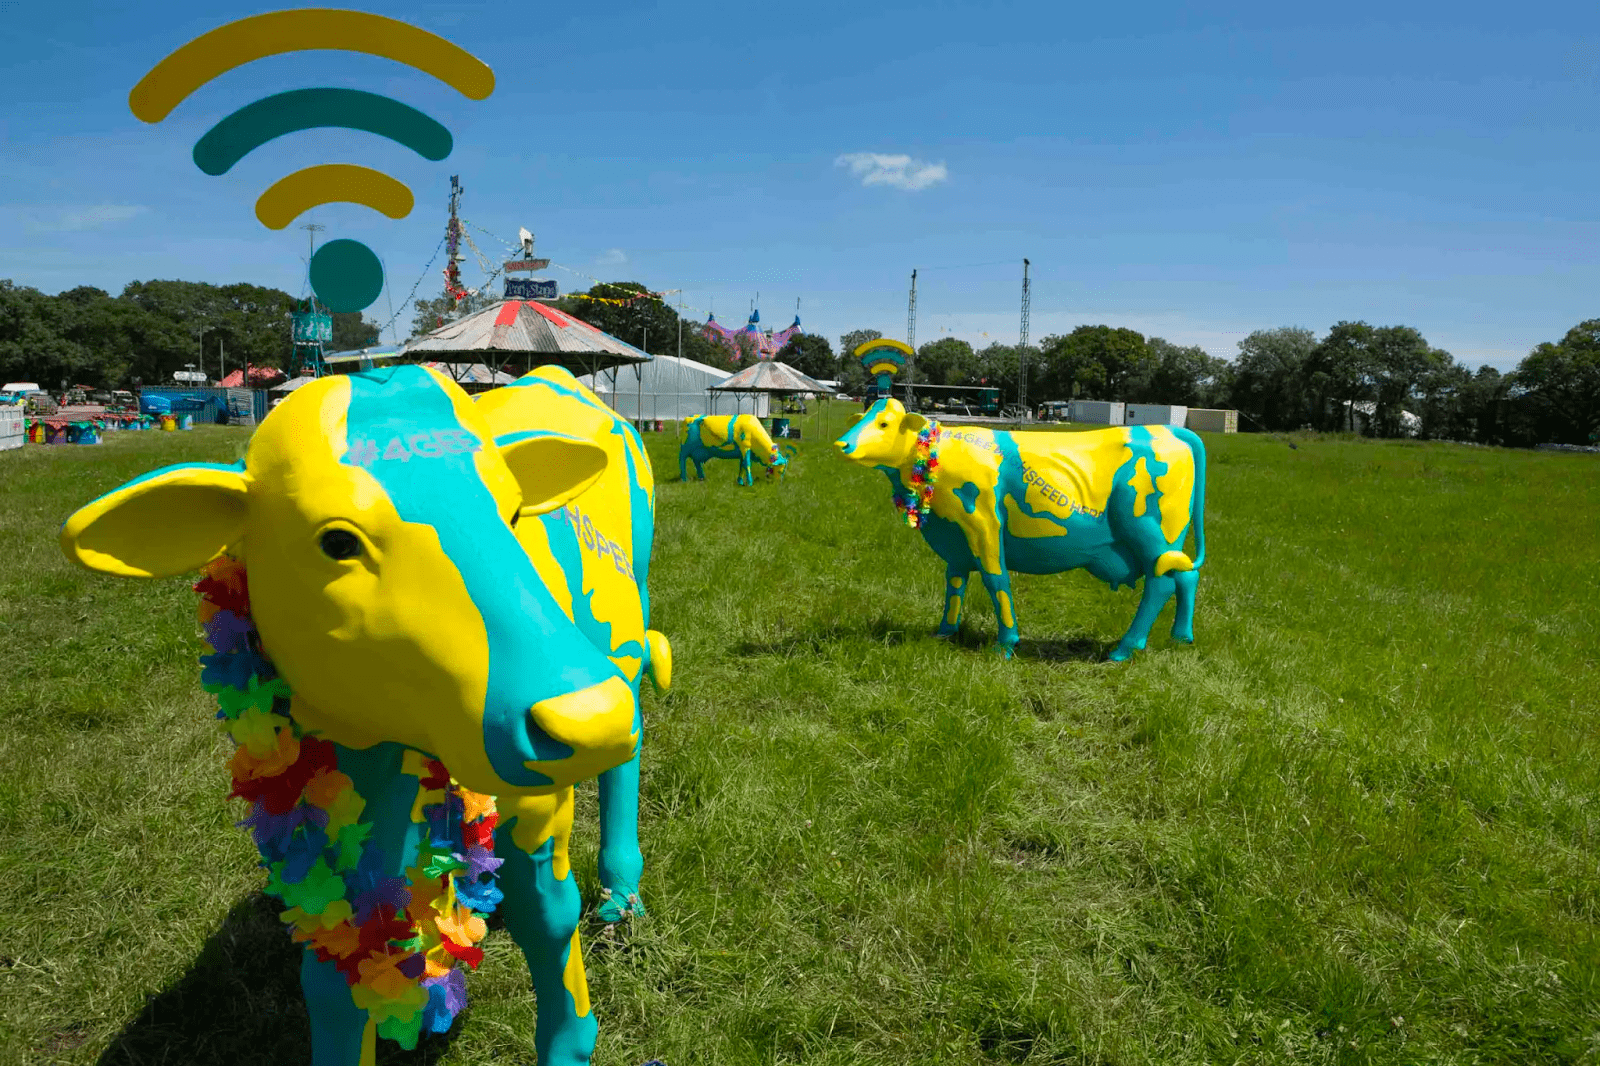 sponsored green and yellow cows that function as wifi hotspots on a outdoor event